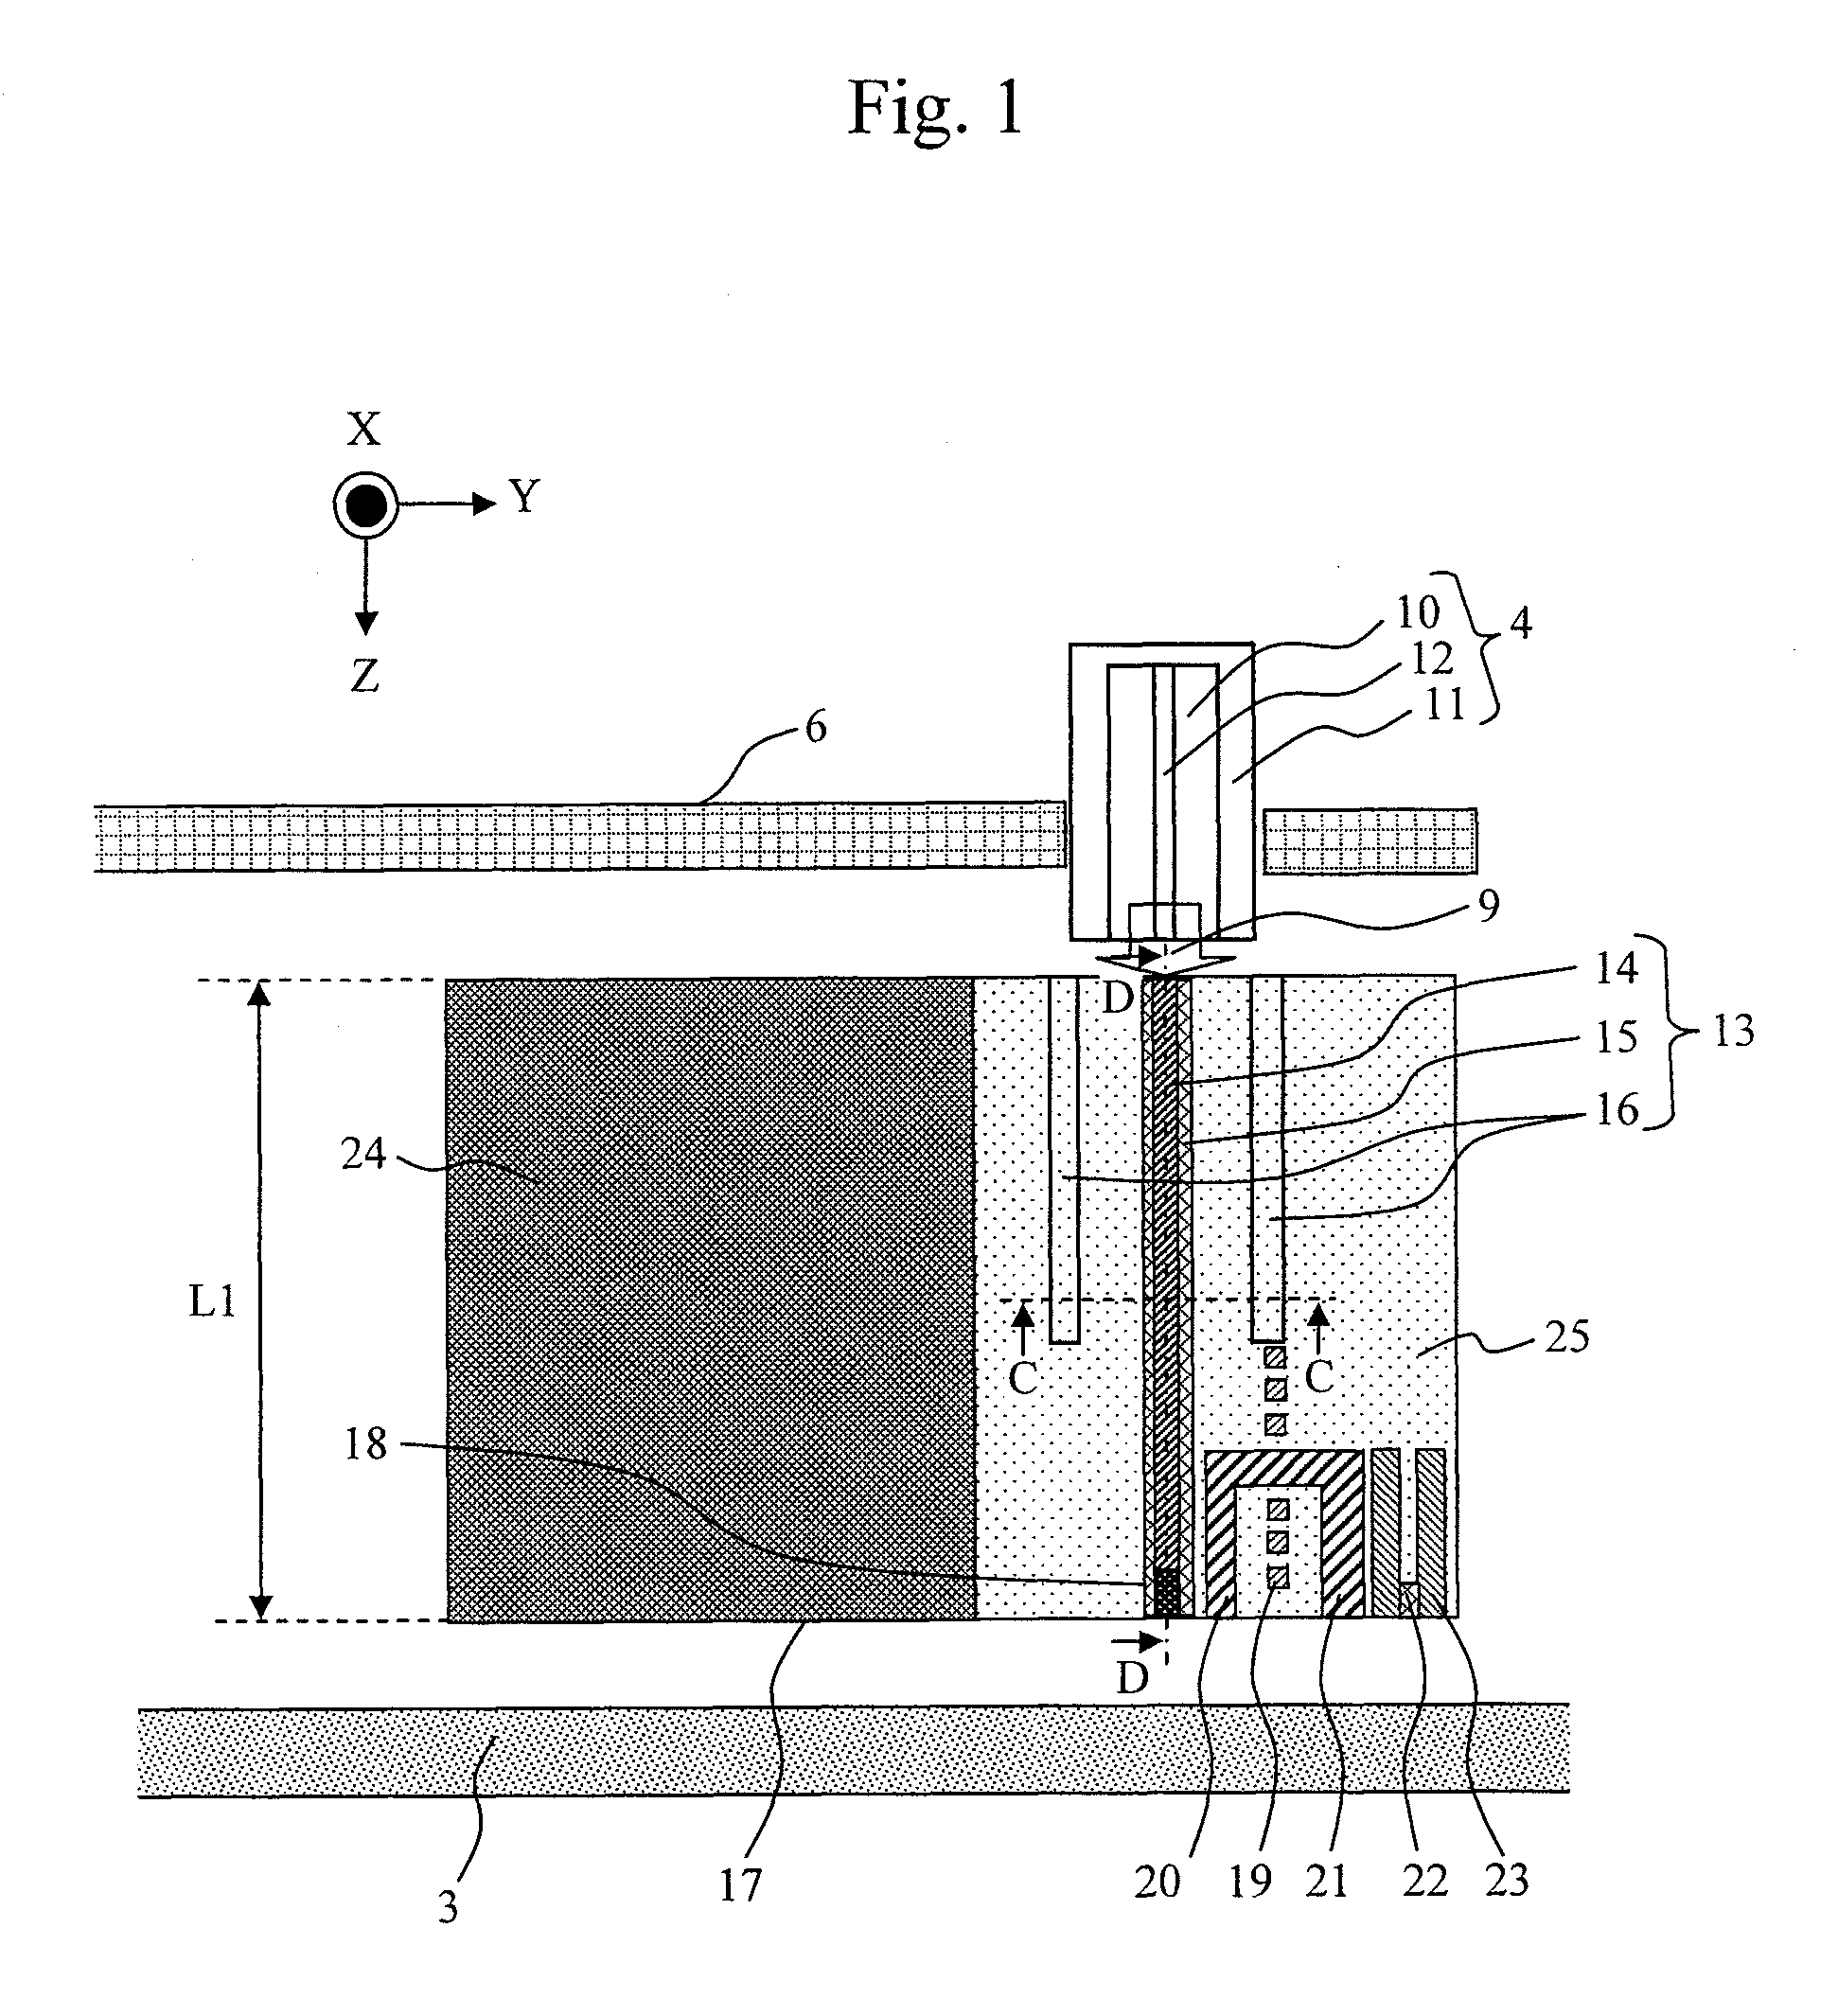 Magnetic recording system used thermal-assisted-magnetic- recording head